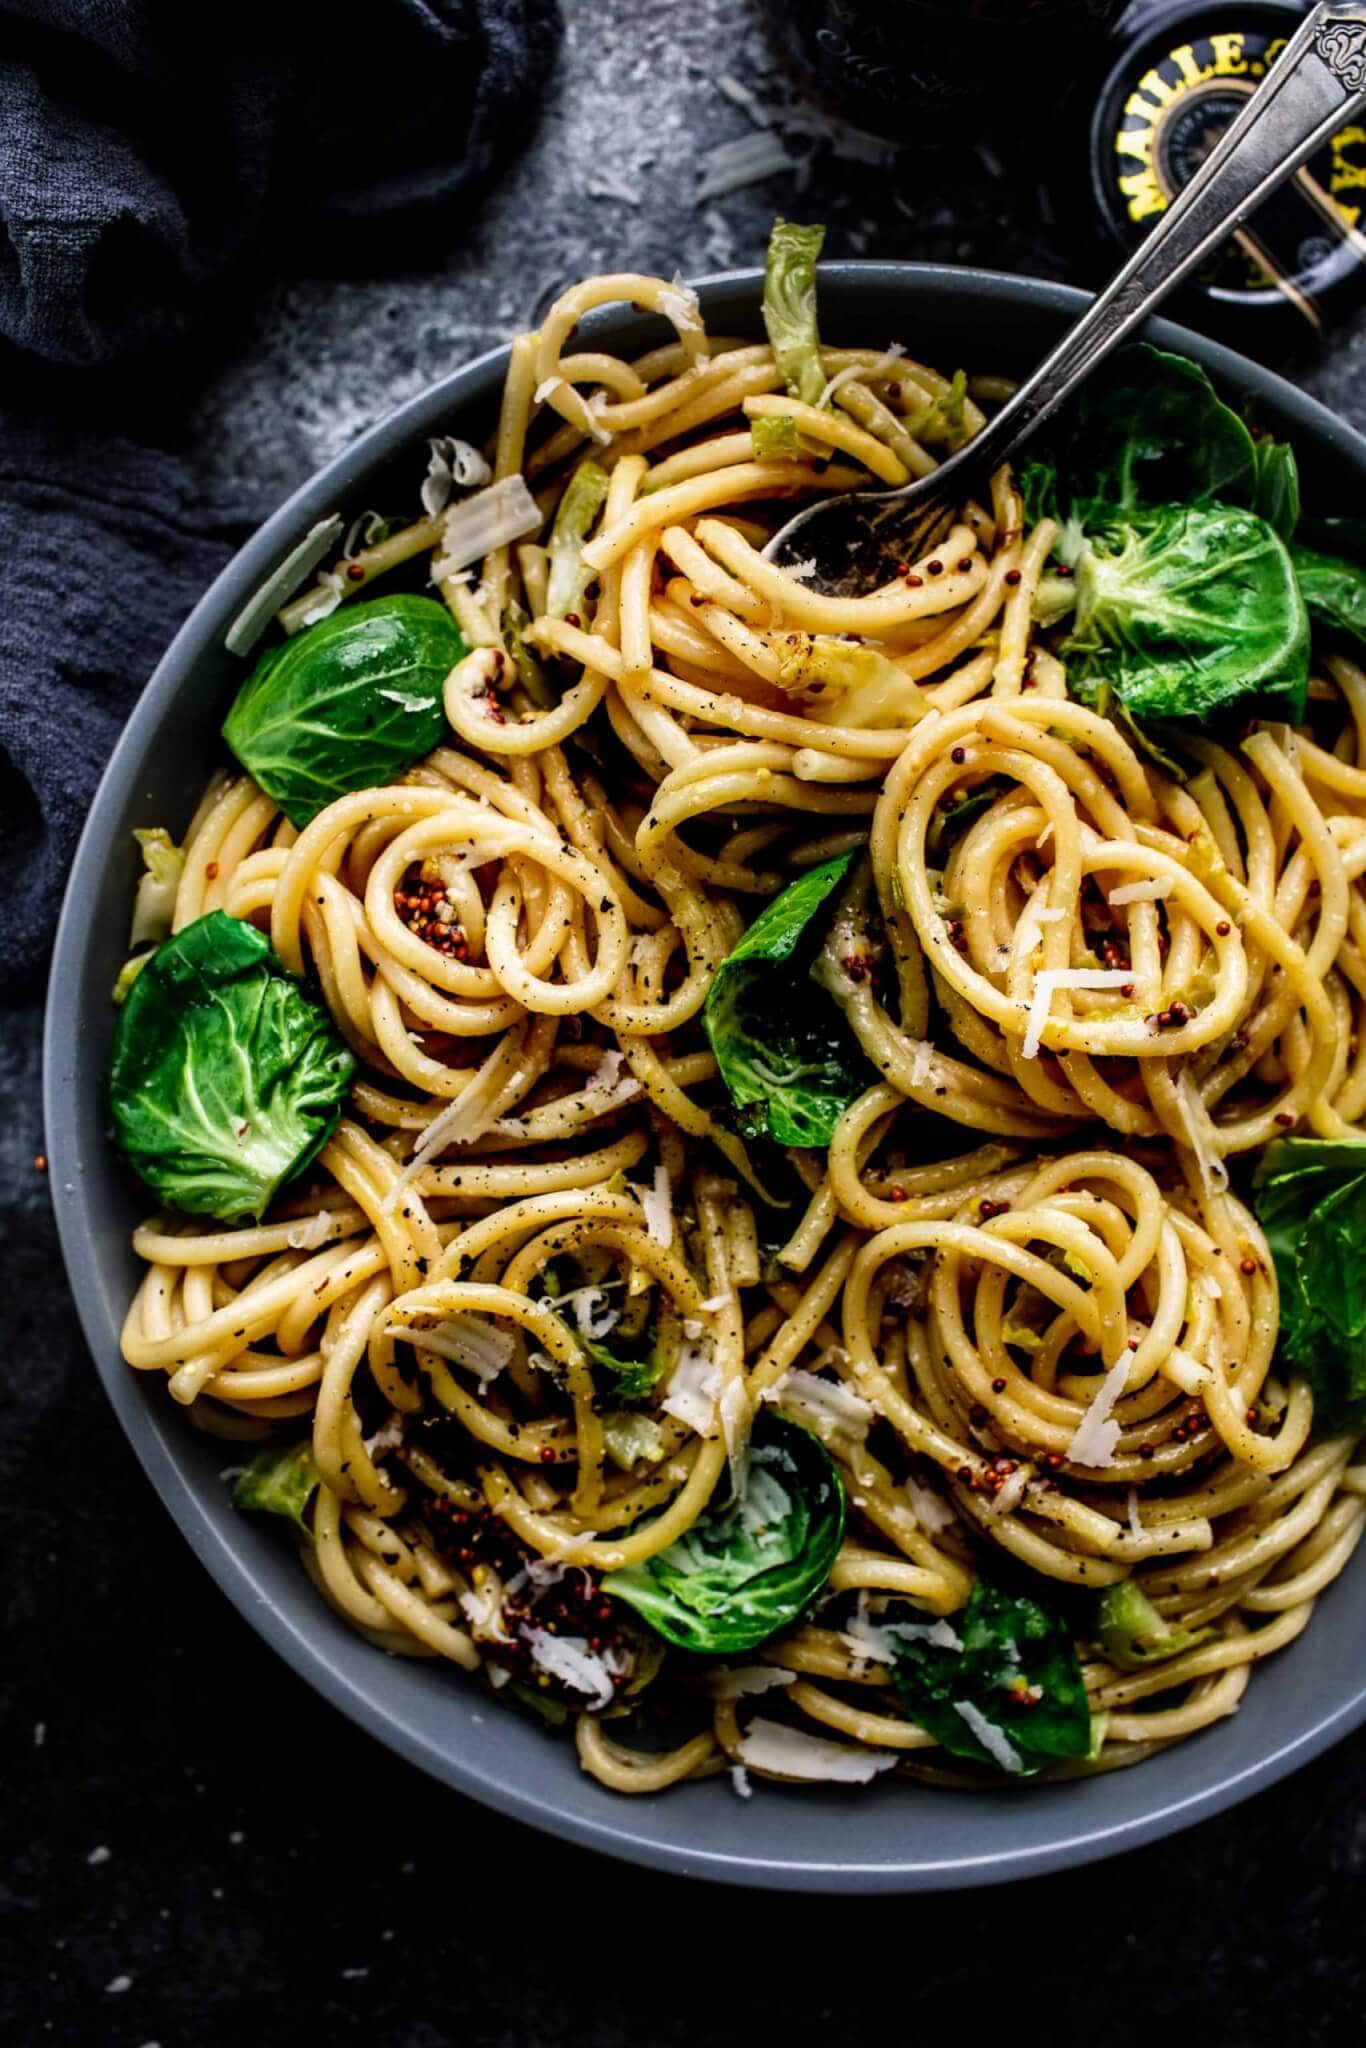 Brussels sprout pasta in grey bowl with fork twirling spaghetti.